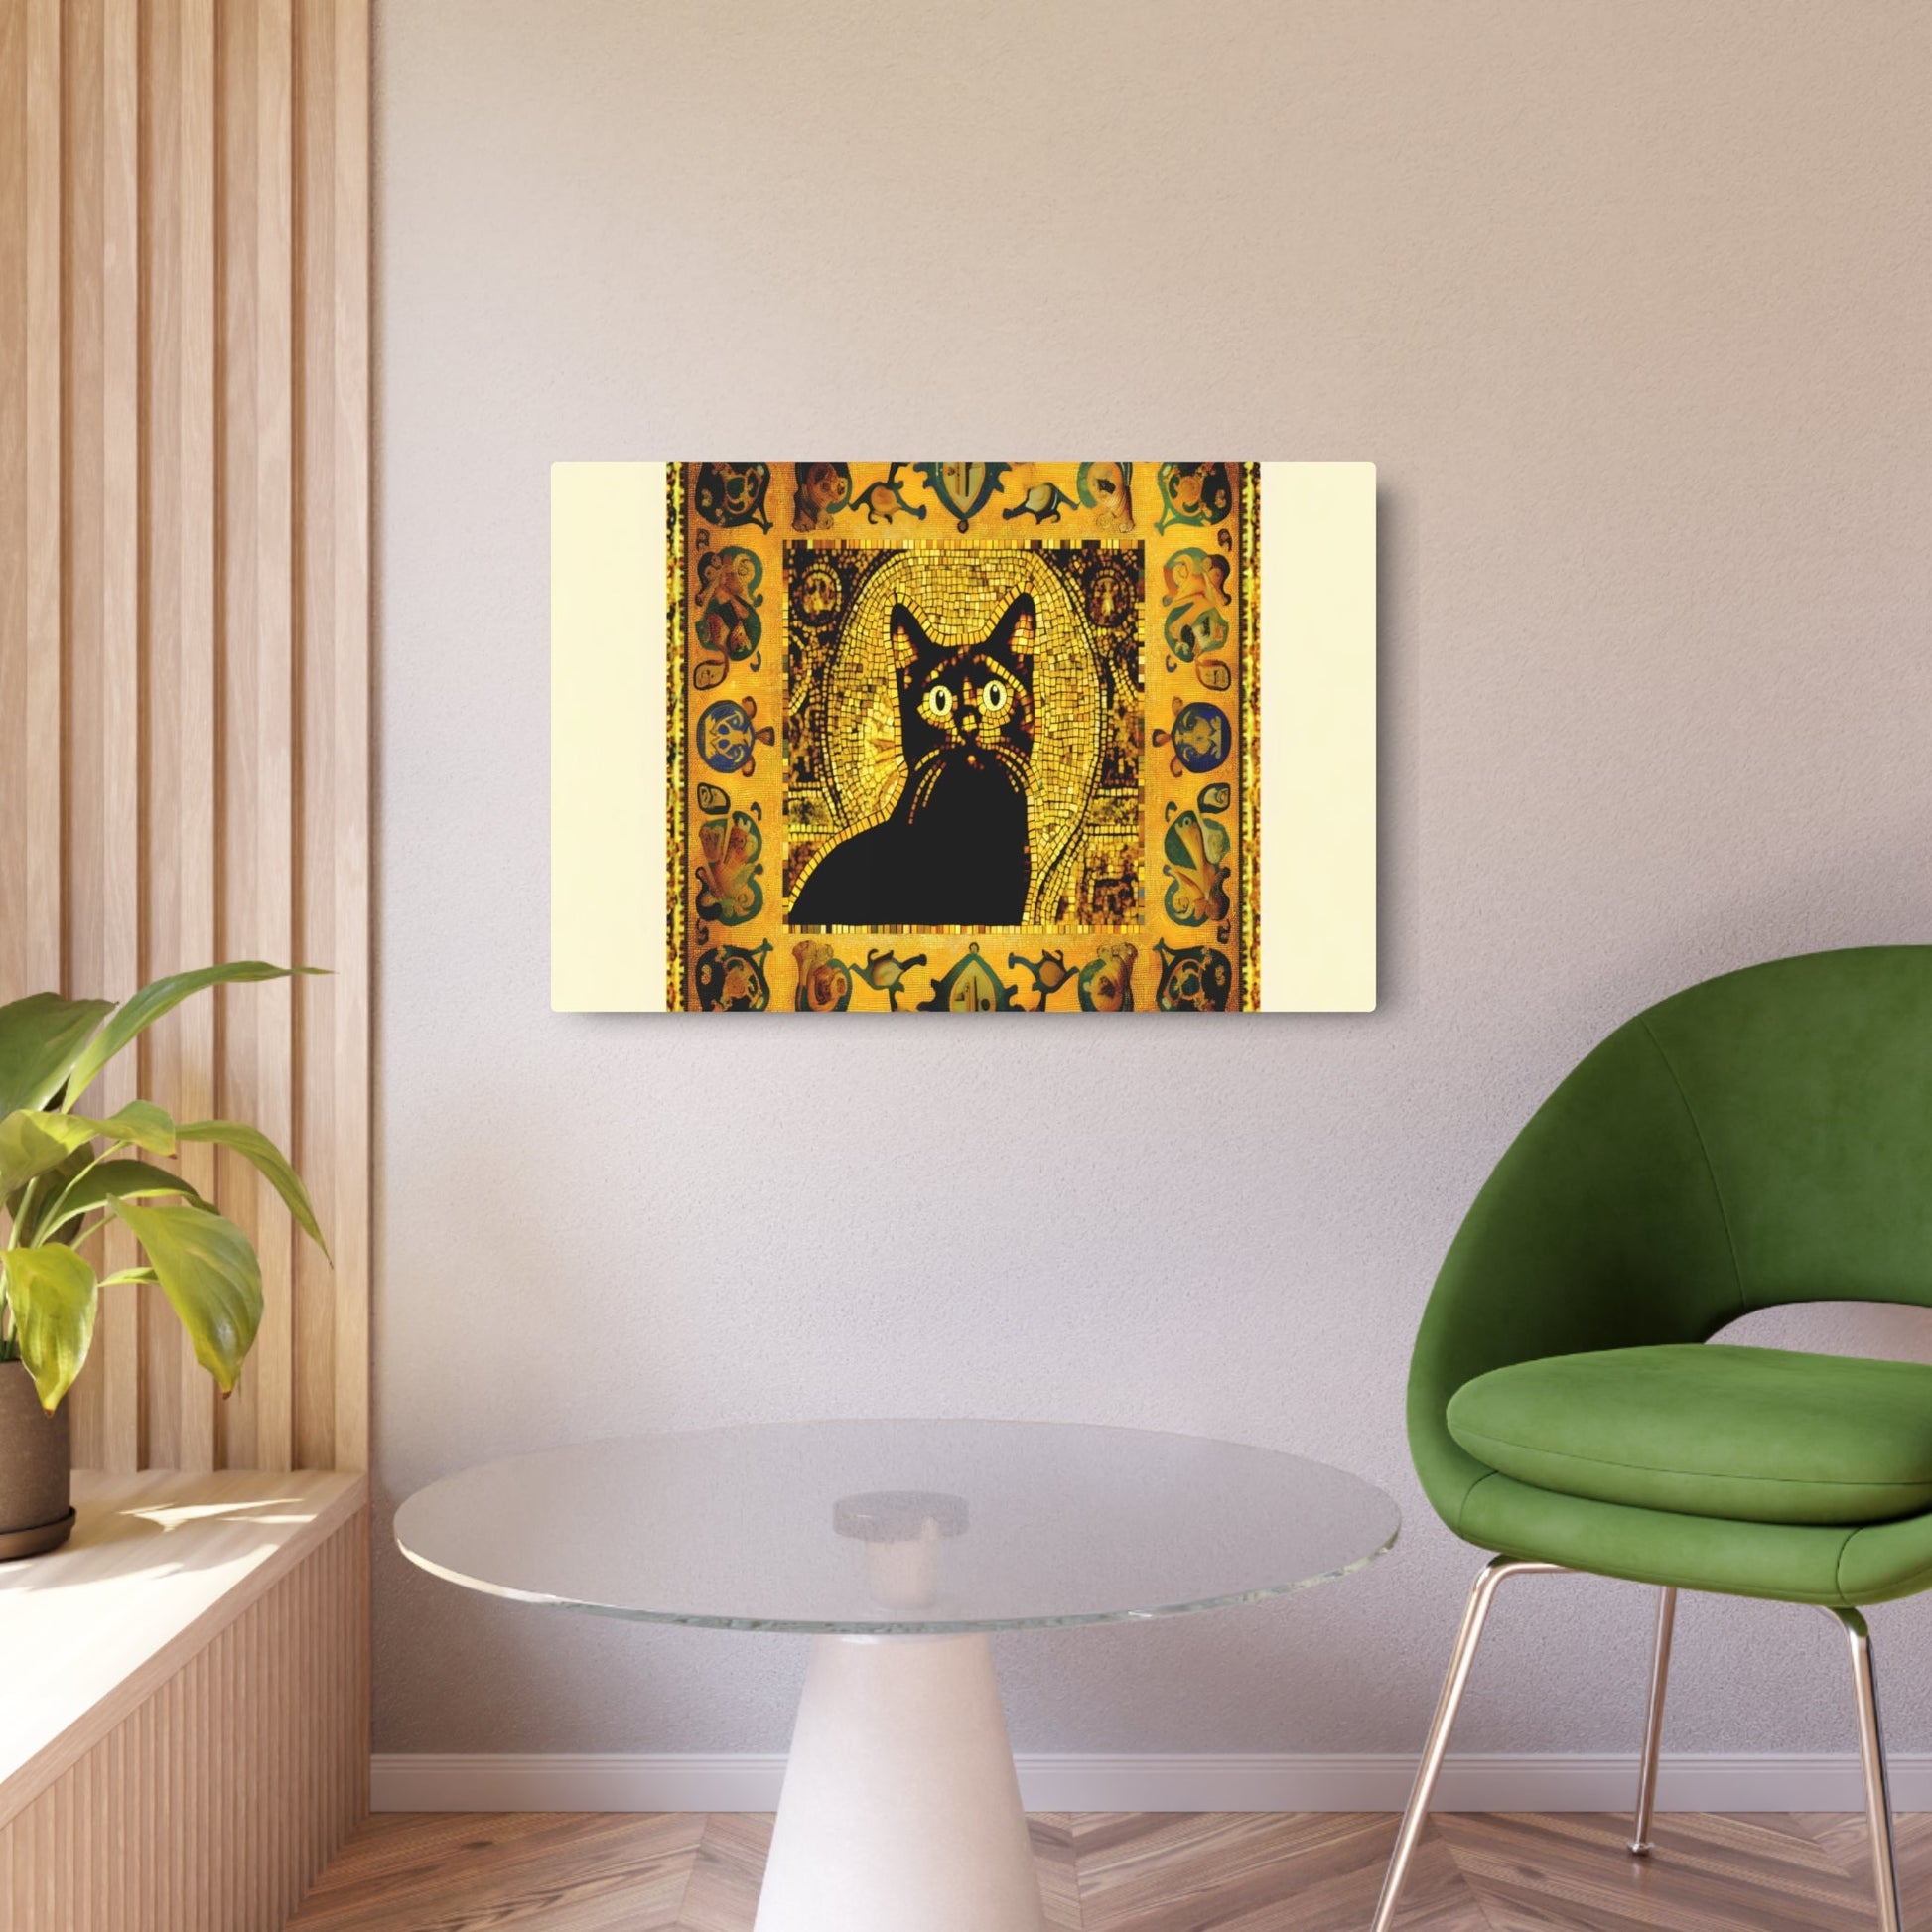 Metal Poster Art | "Byzantine Art Style Cat Image Surrounded by Traditional Golden Mosaics - Non-Western & Global Styles, Byzantine Category" - Metal Poster Art 36″ x 24″ (Horizontal) 0.12''